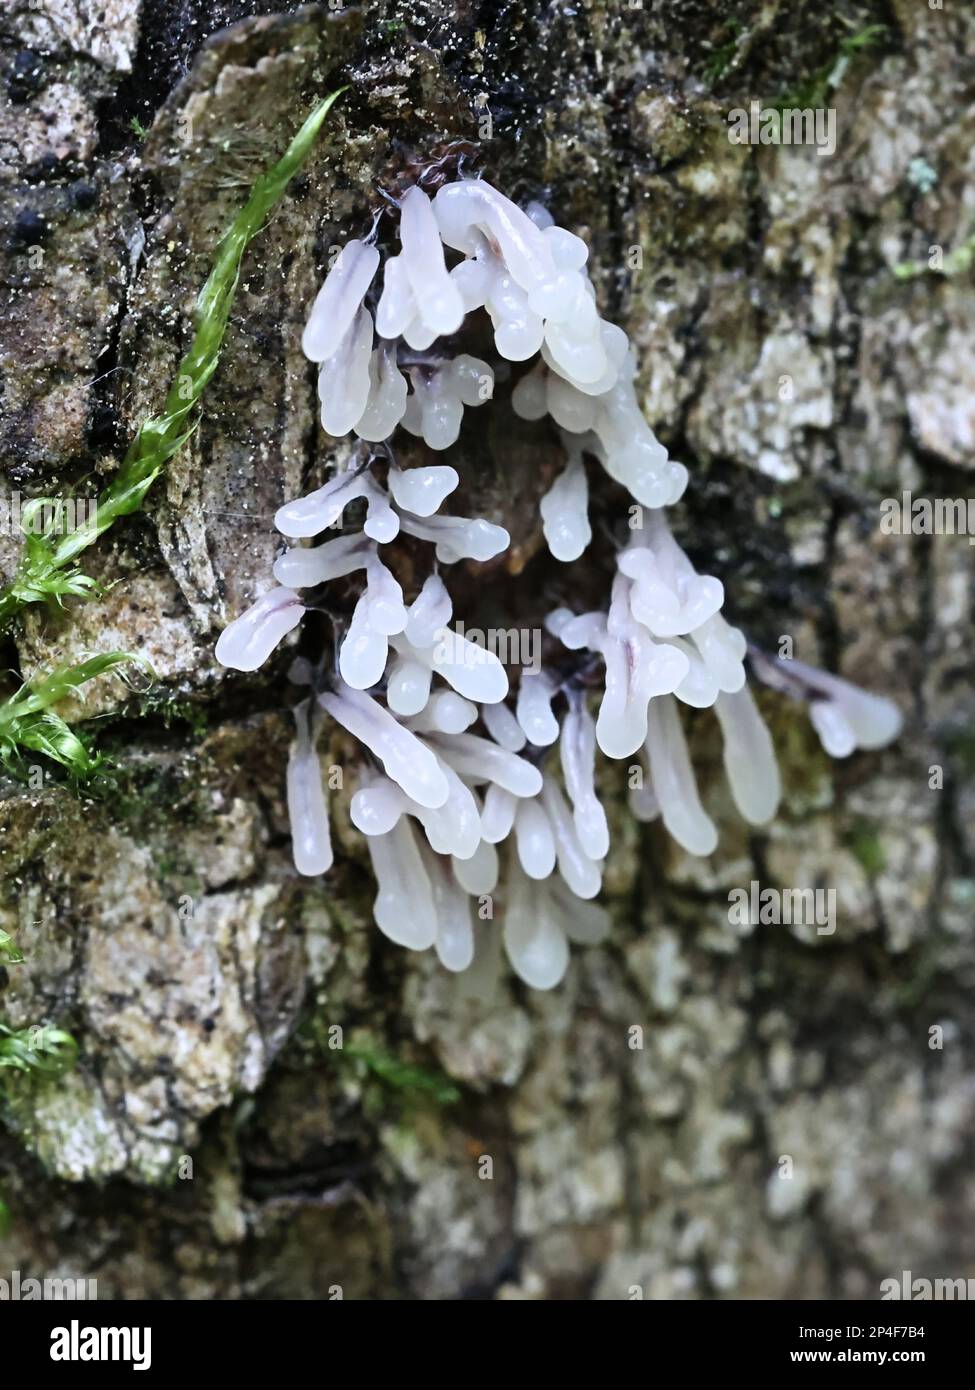 Stemonitopsis typhina, also called Comatricha typhoides, a slime mold from Finland, no common English name Stock Photo